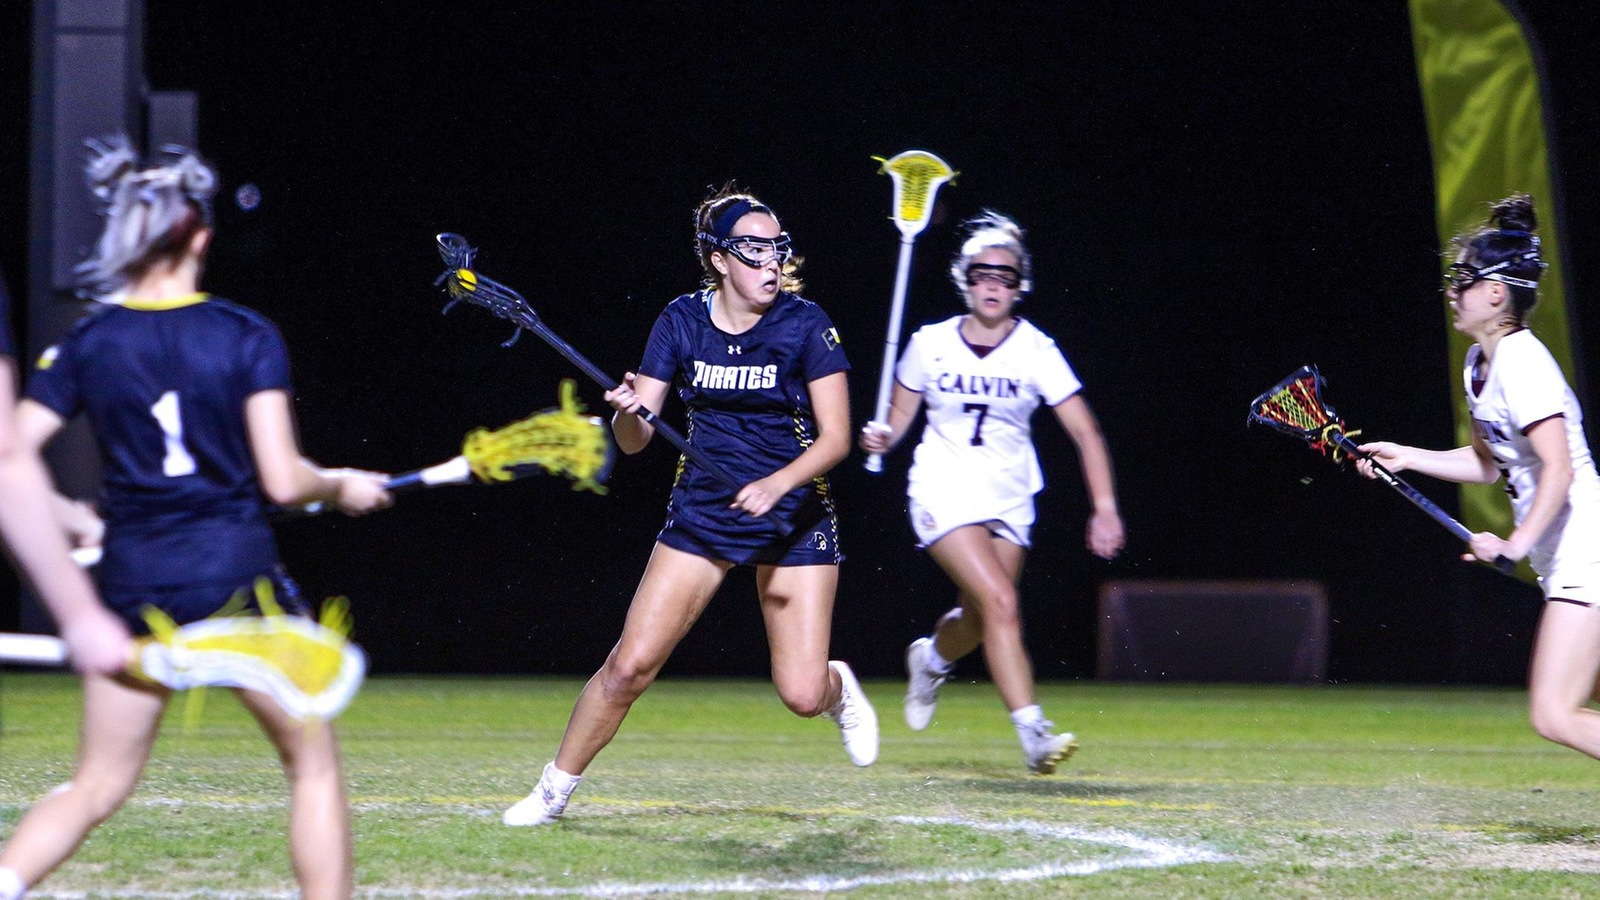 Women’s Lacrosse Prevails Over the Calvin Knights